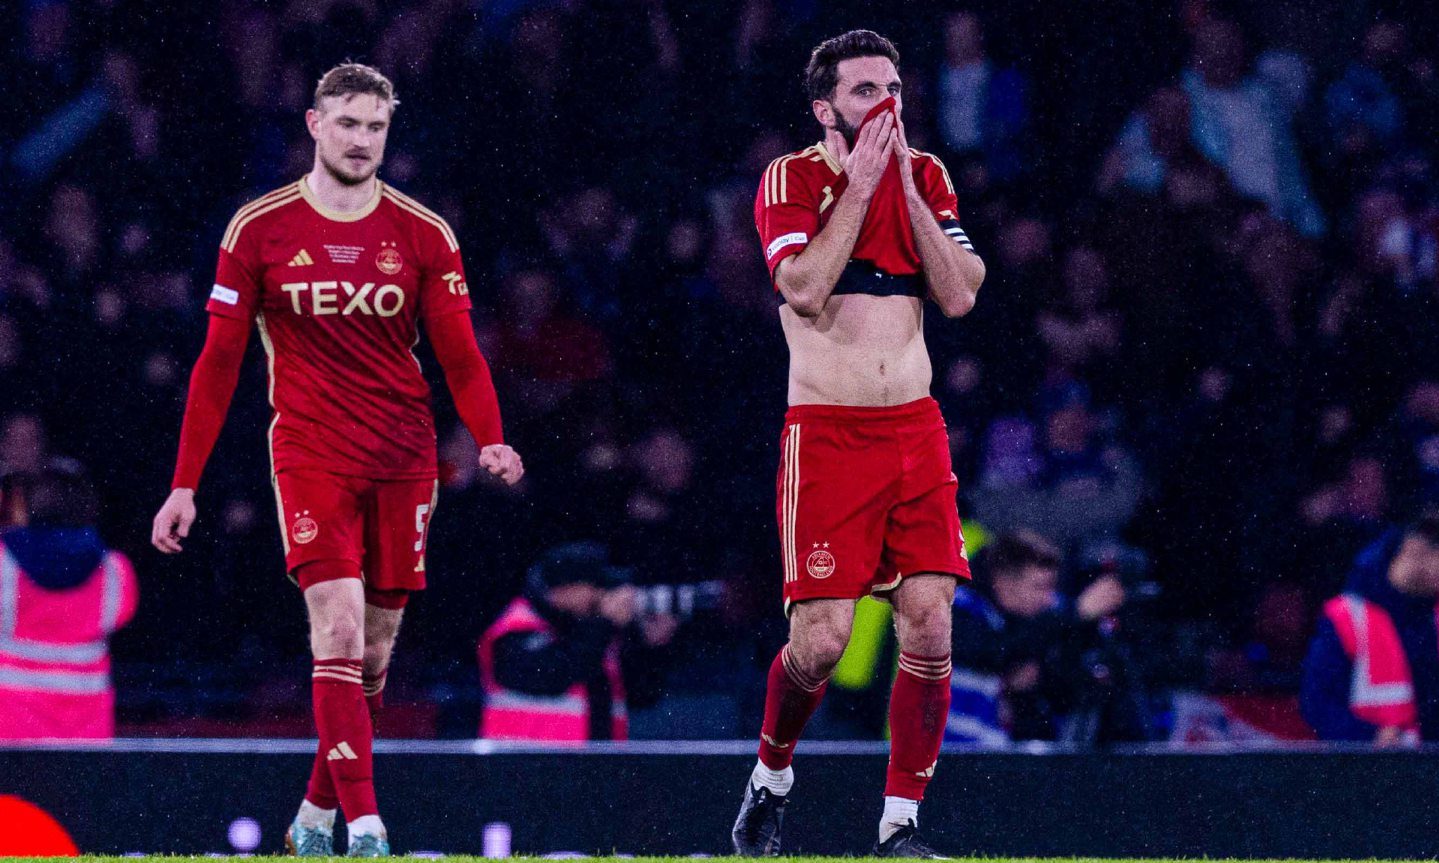 Aberdeen's Graeme Shinnie and Richard Jensen looking dejected on the pitch, Shinnie is wiping his face with his shirt